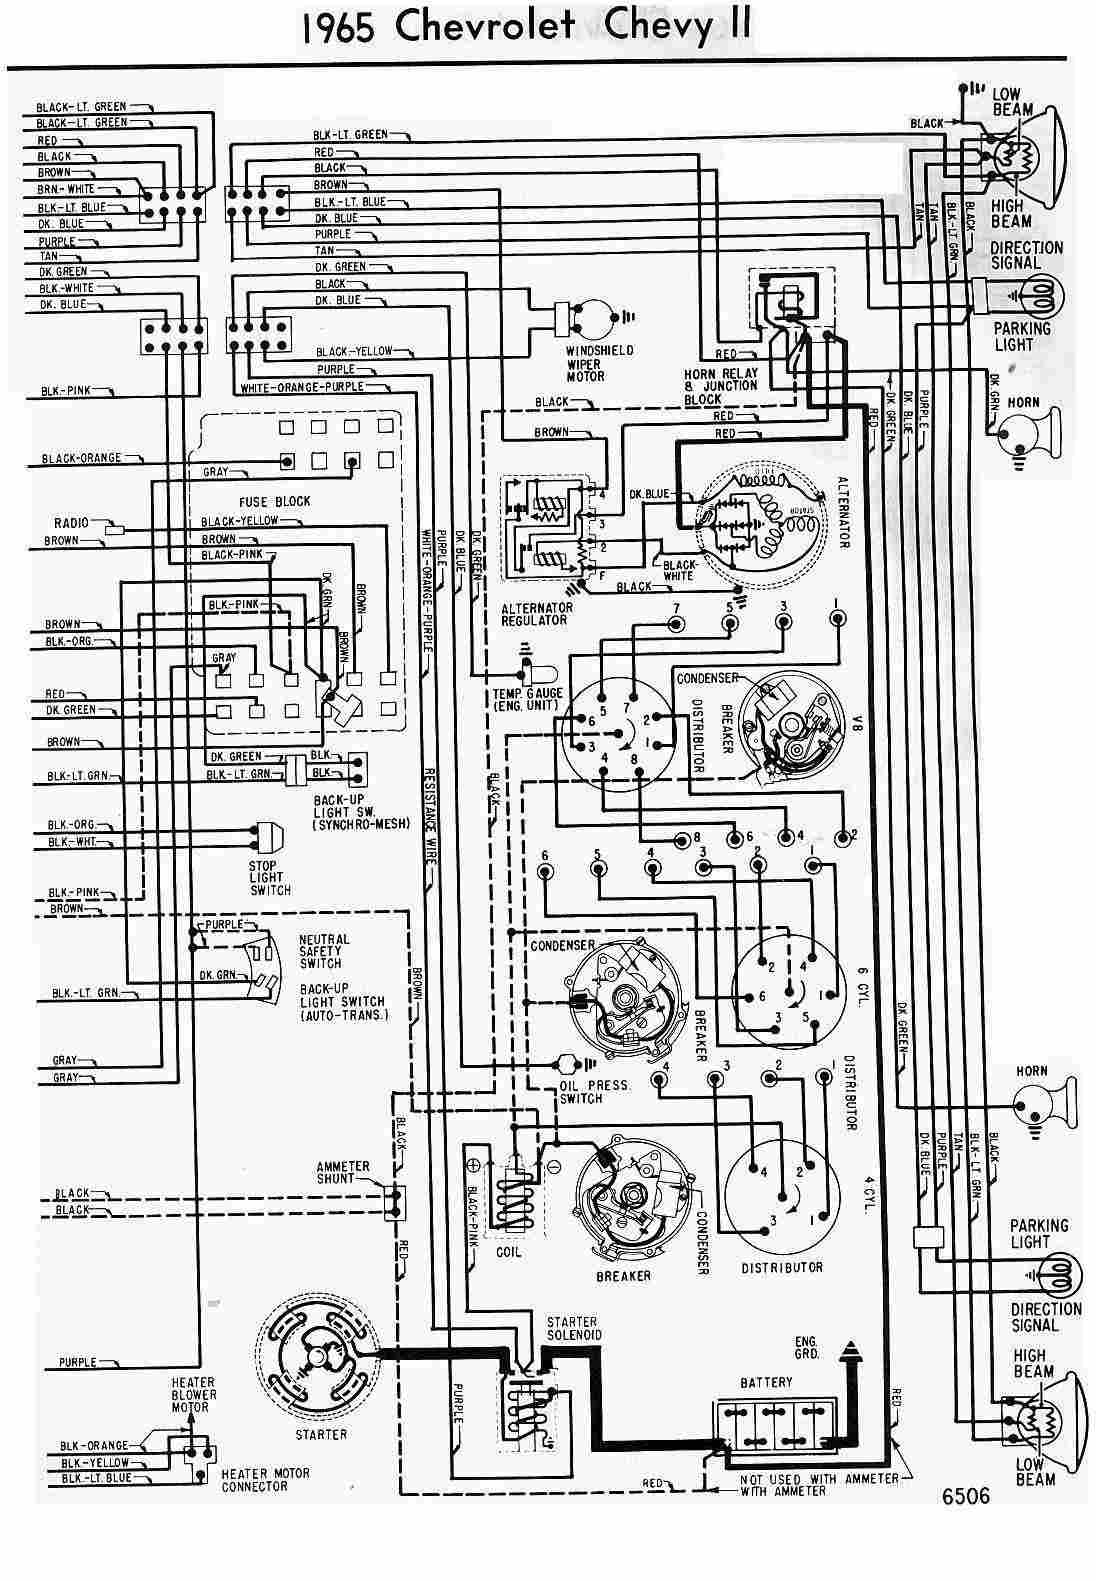 1965 Chevelle Ignition Switch And Starter Wiring Diagram - Collection